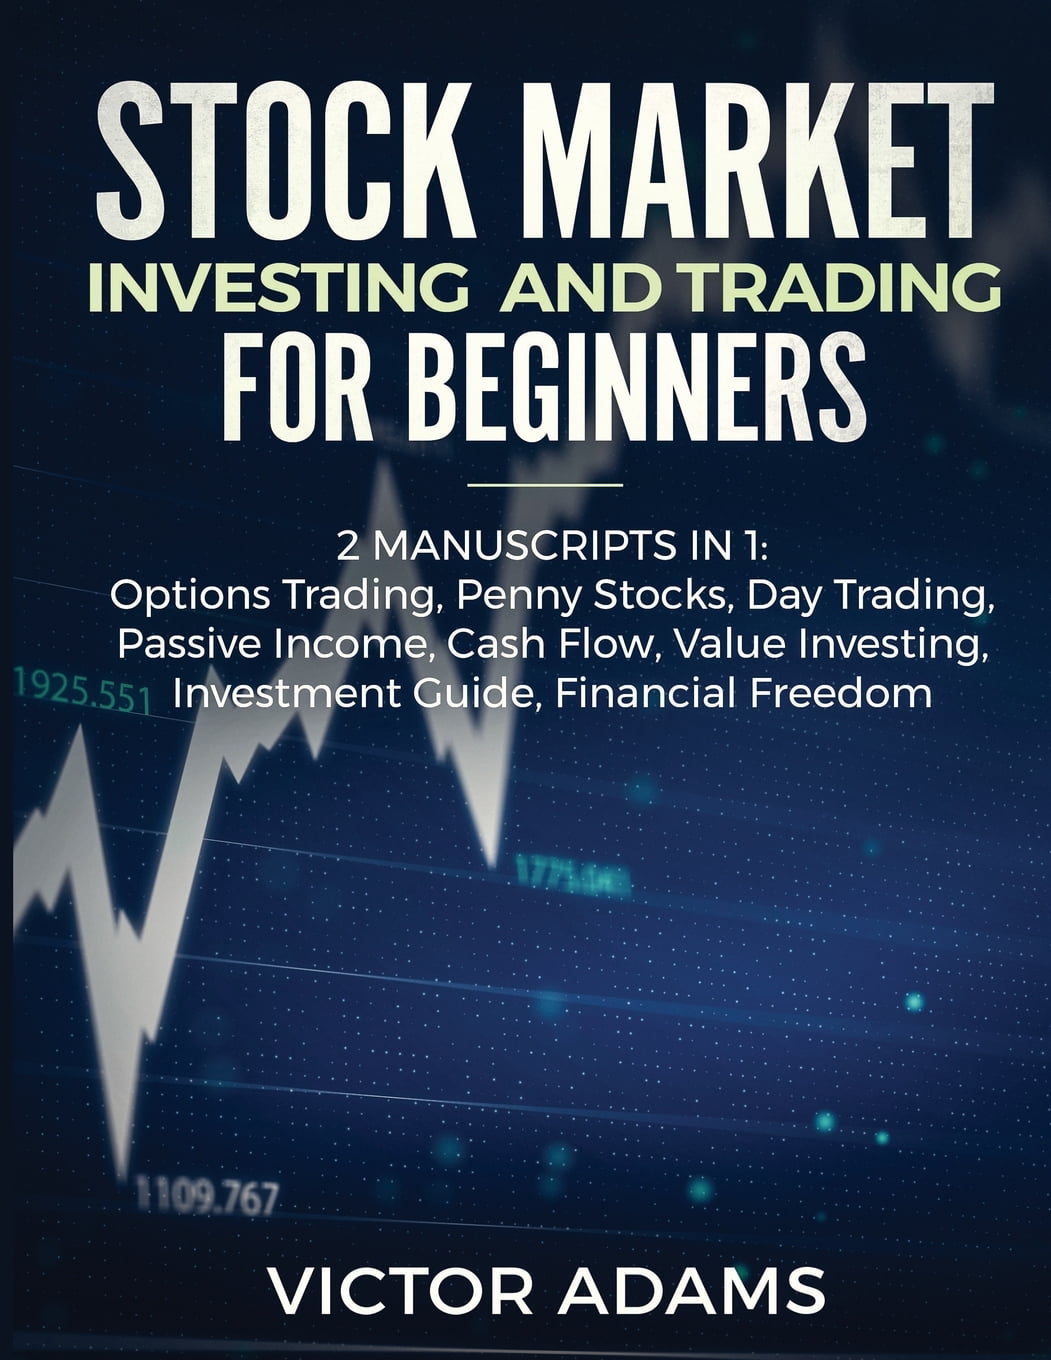 Penny stocks investing for dummies without forex